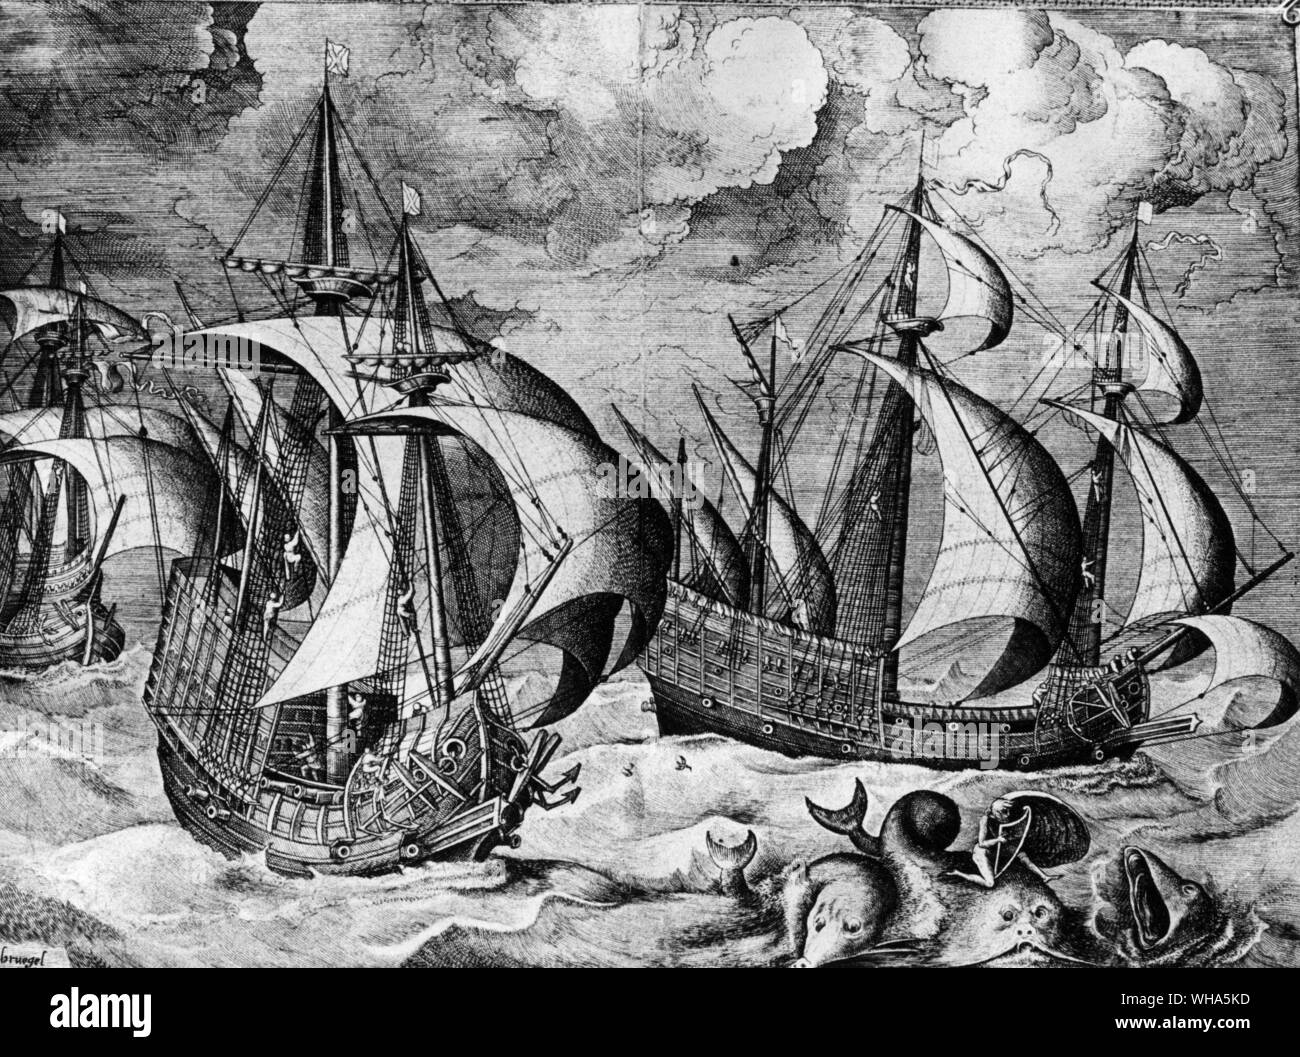 Painting by Bruegel probably after 1556 as he stopped signing his name Brueghel about this time.. c 1525-1569. Photo: Alexandra Lawrence. Sailing Ships. Stock Photo